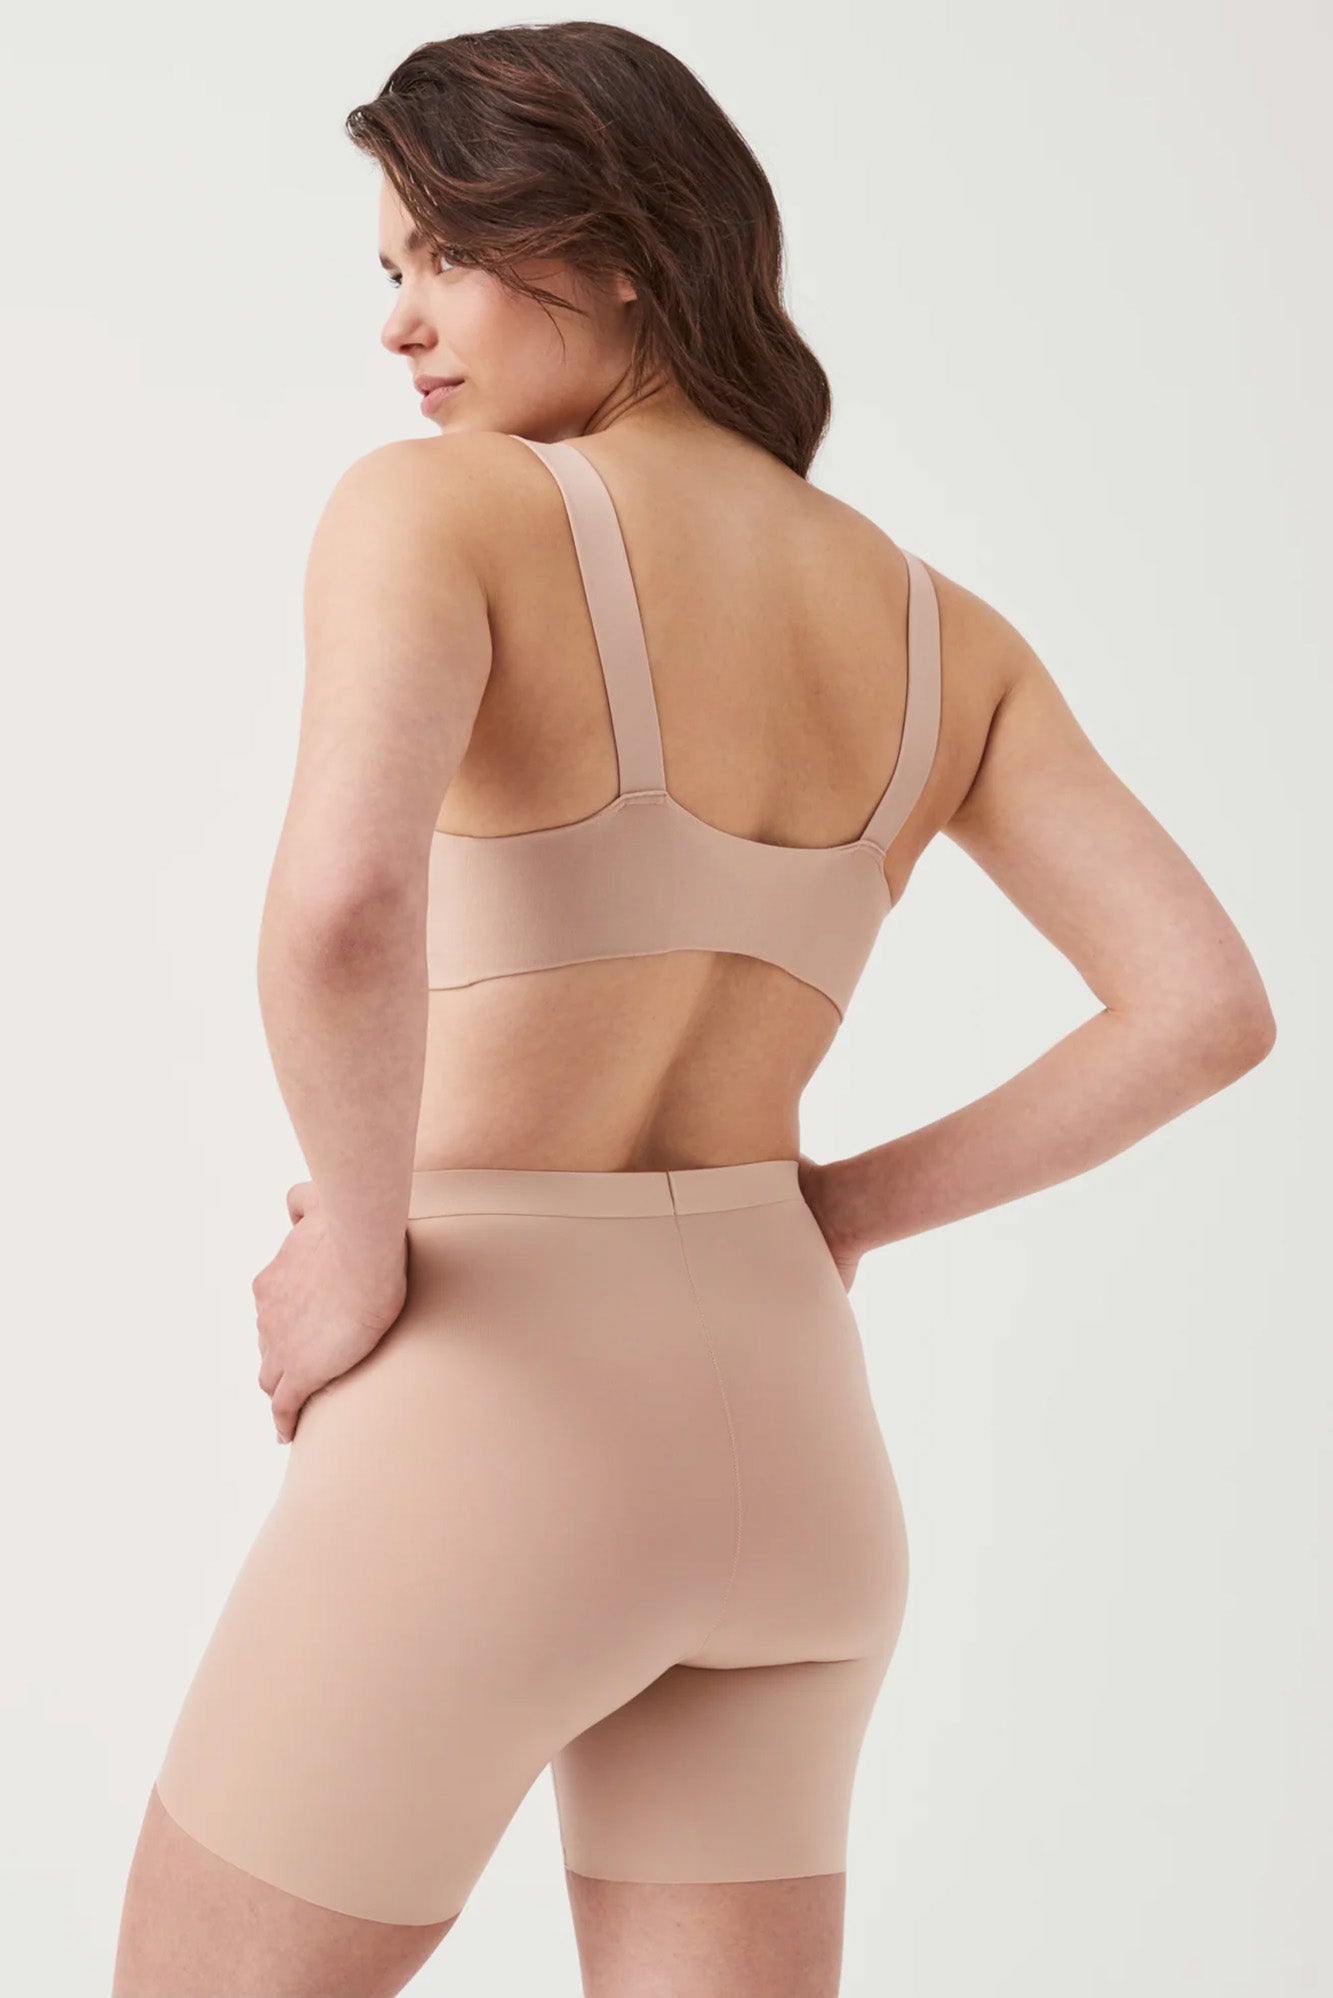 The Thinstincts 2.0 Girlshort By Spanx In Champagne Beige - GINIA